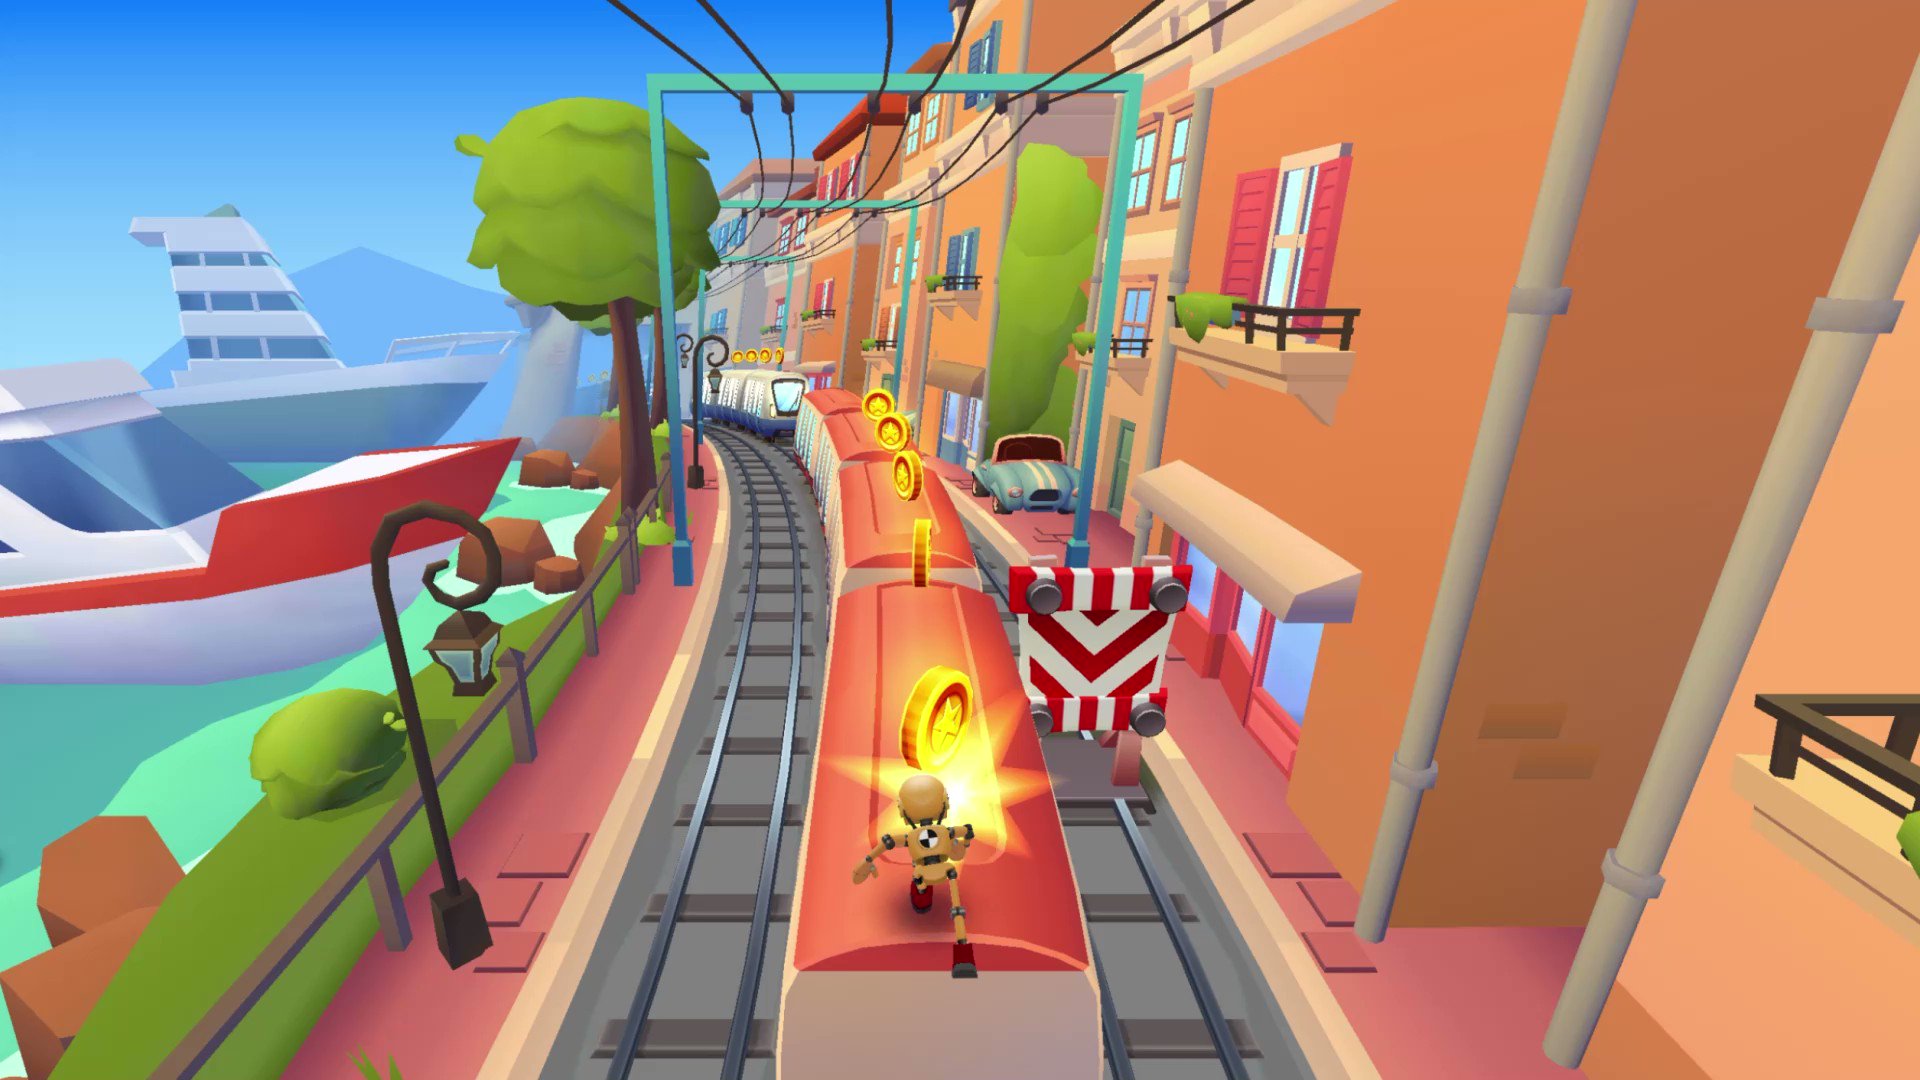 Subway Surfers - Vroom Vroom. . . CRASH 💥 The #SubwaySurfers World Tour is  crashing into Monaco! 🏎️ Take a test drive with our daredevil new surfer,  Dummy, and break it down